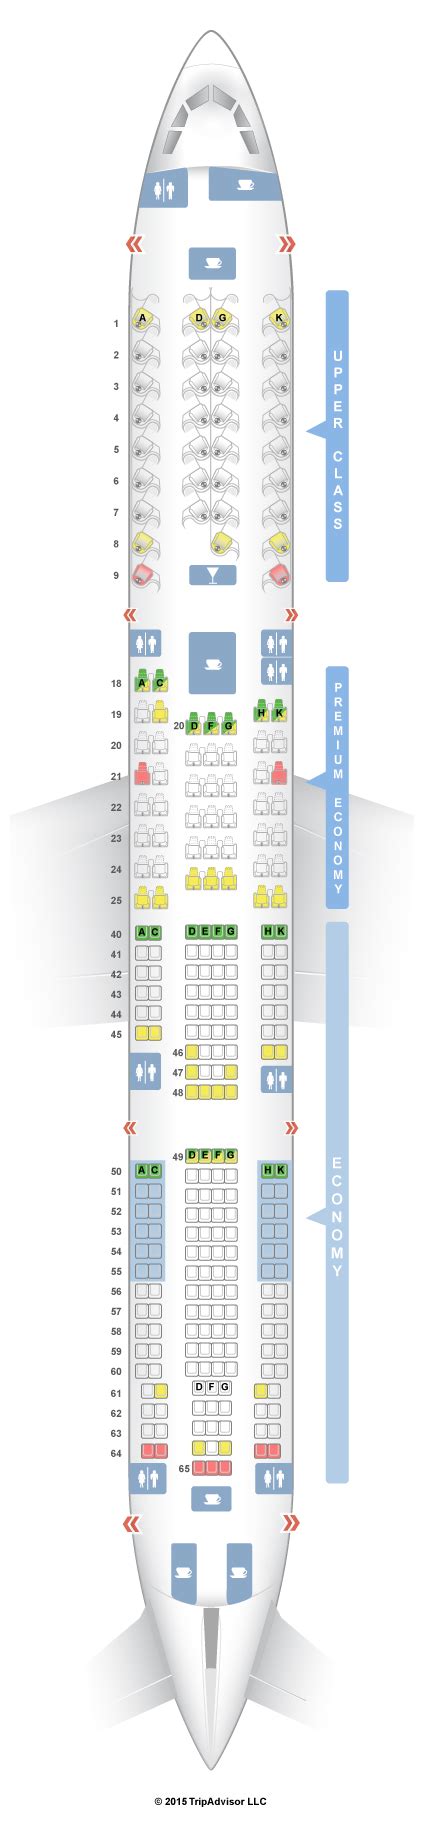 10 Airbus A330 Seats Plan Pictures Airbus Way